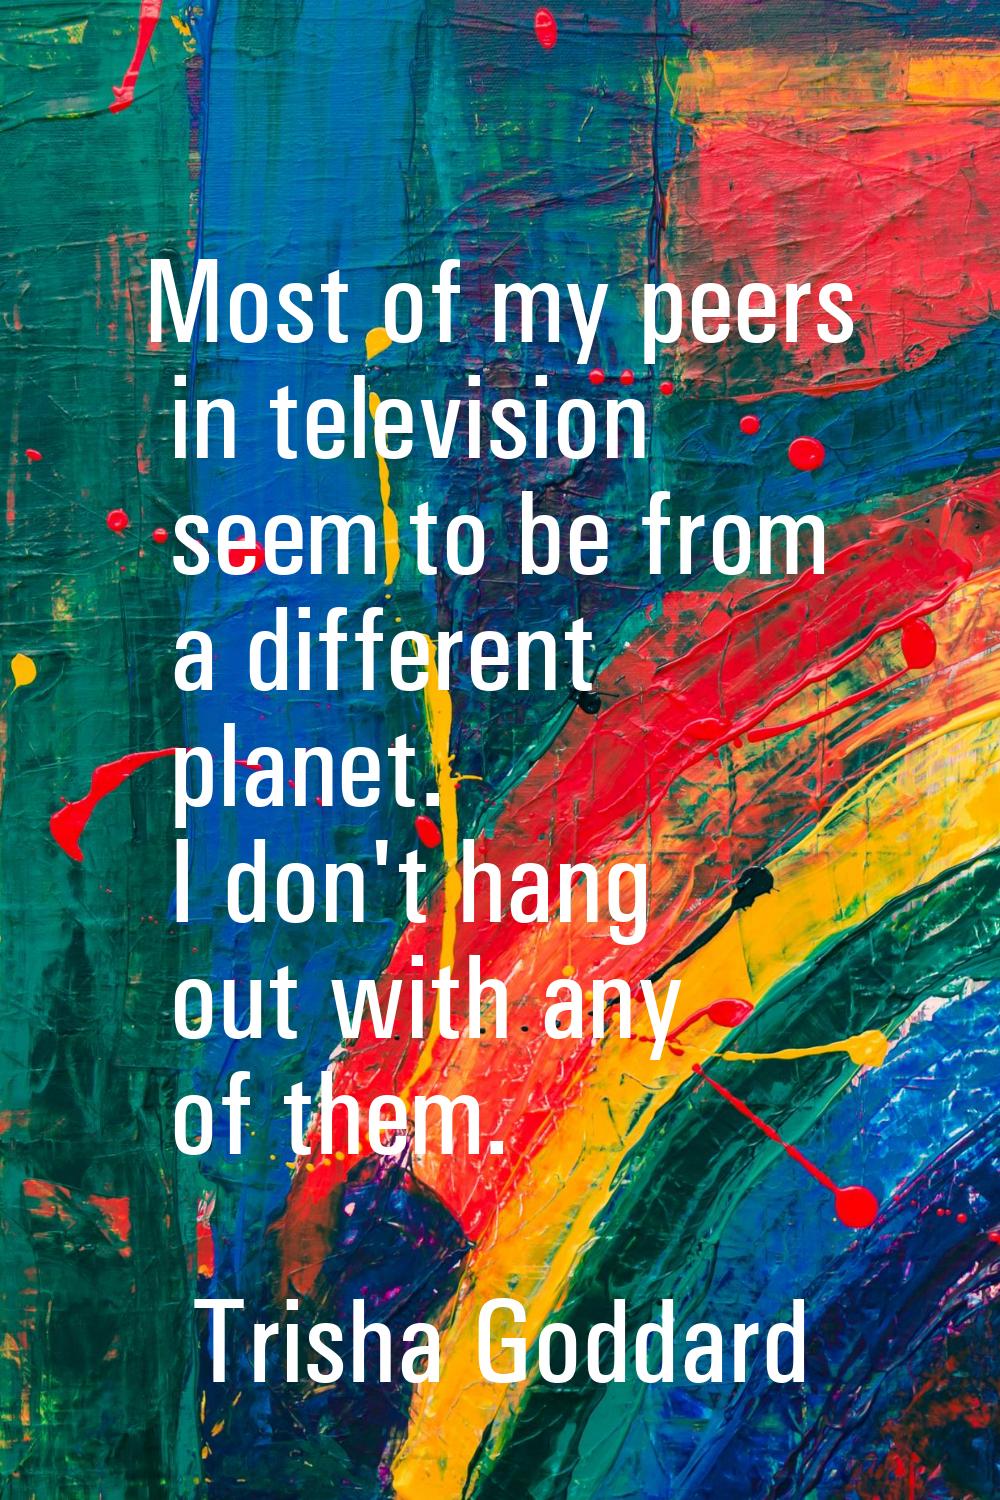 Most of my peers in television seem to be from a different planet. I don't hang out with any of the